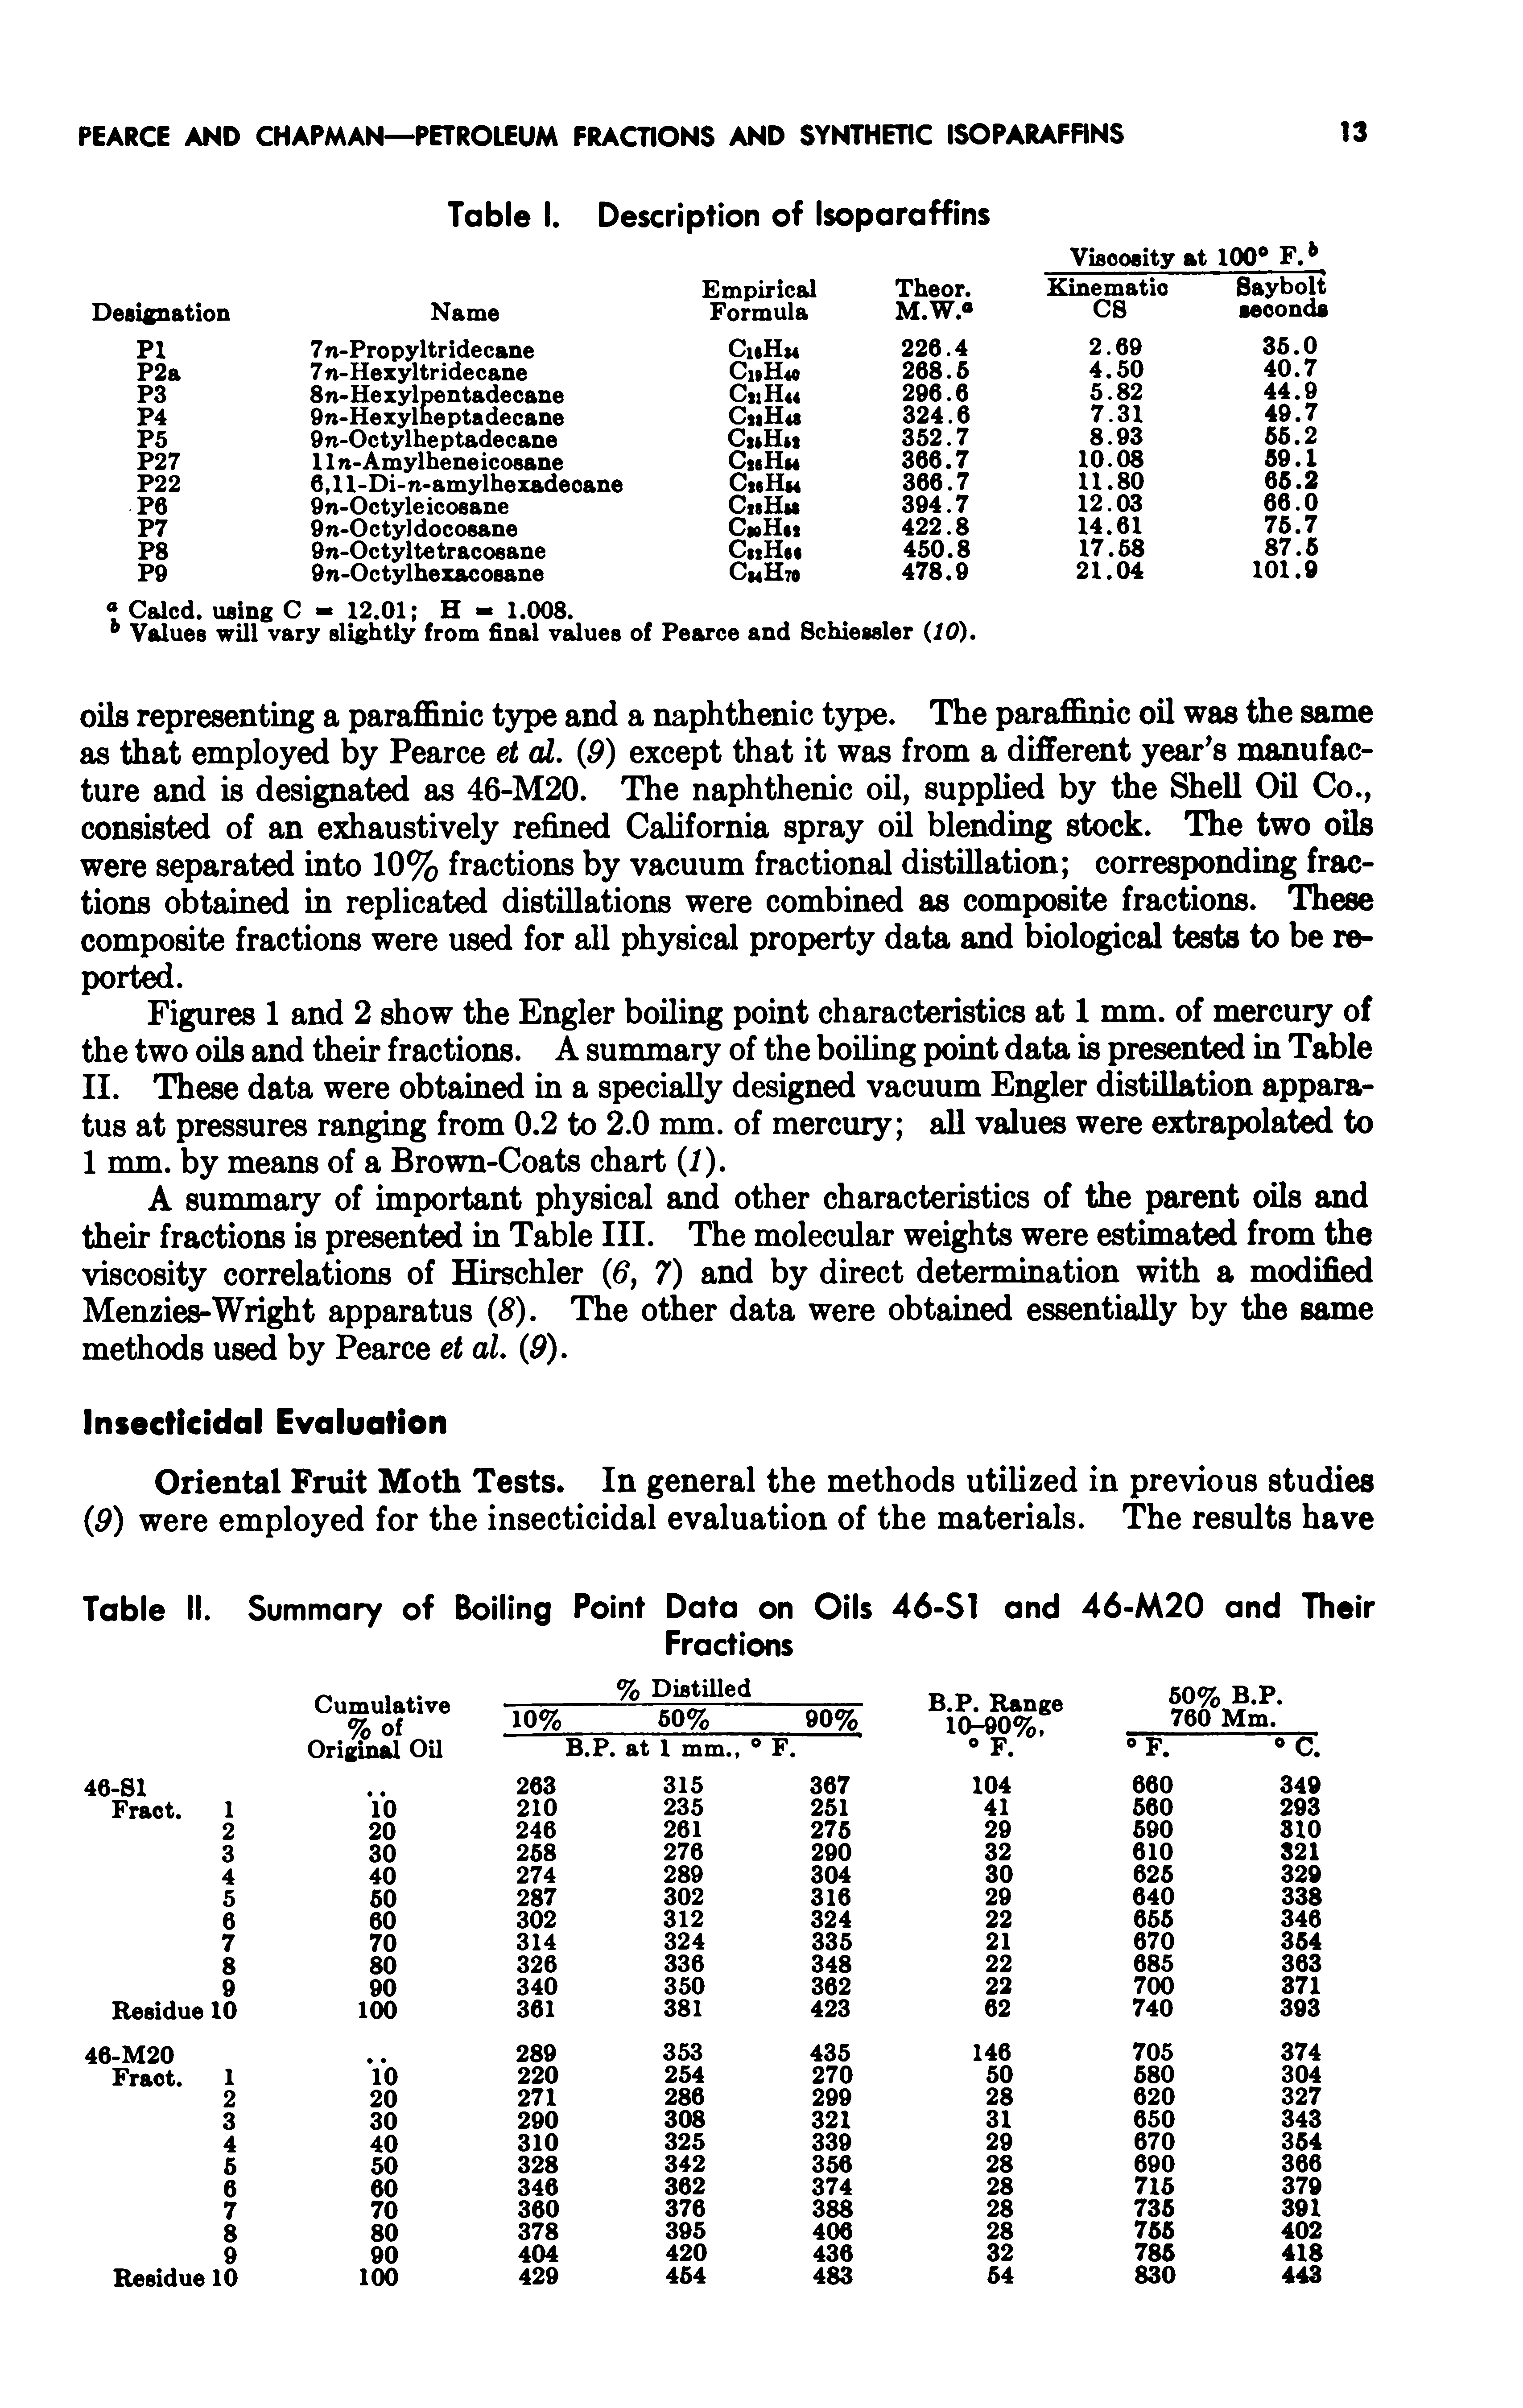 Figures 1 and 2 show the Engler boiling point characteristics at 1 mm. of mercury of the two oils and their fractions. A summary of the boiling point data is presented in Table II. These data were obtained in a specially designed vacuum Engler distillation apparatus at pressures ranging from 0.2 to 2.0 mm. of mercury all values were extrapolated to 1 mm. by means of a Brown-Coats chart (I).